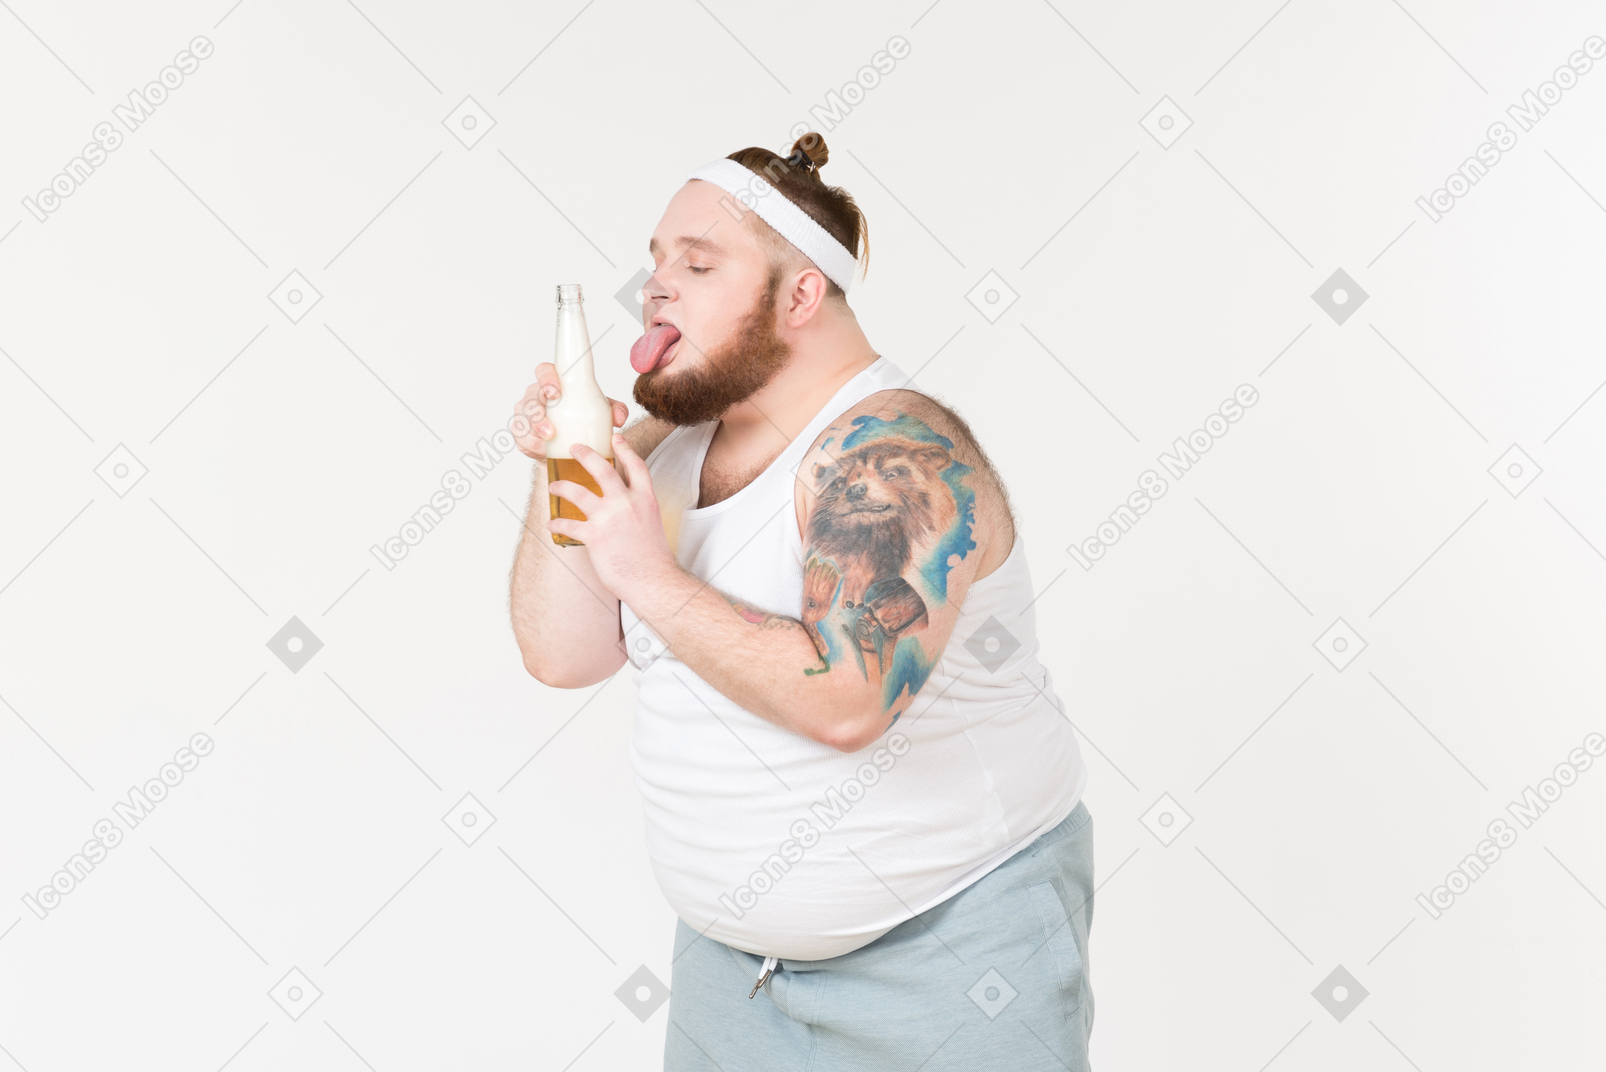 A fat sportsman holding a bottle of beer and sticking his tongue out